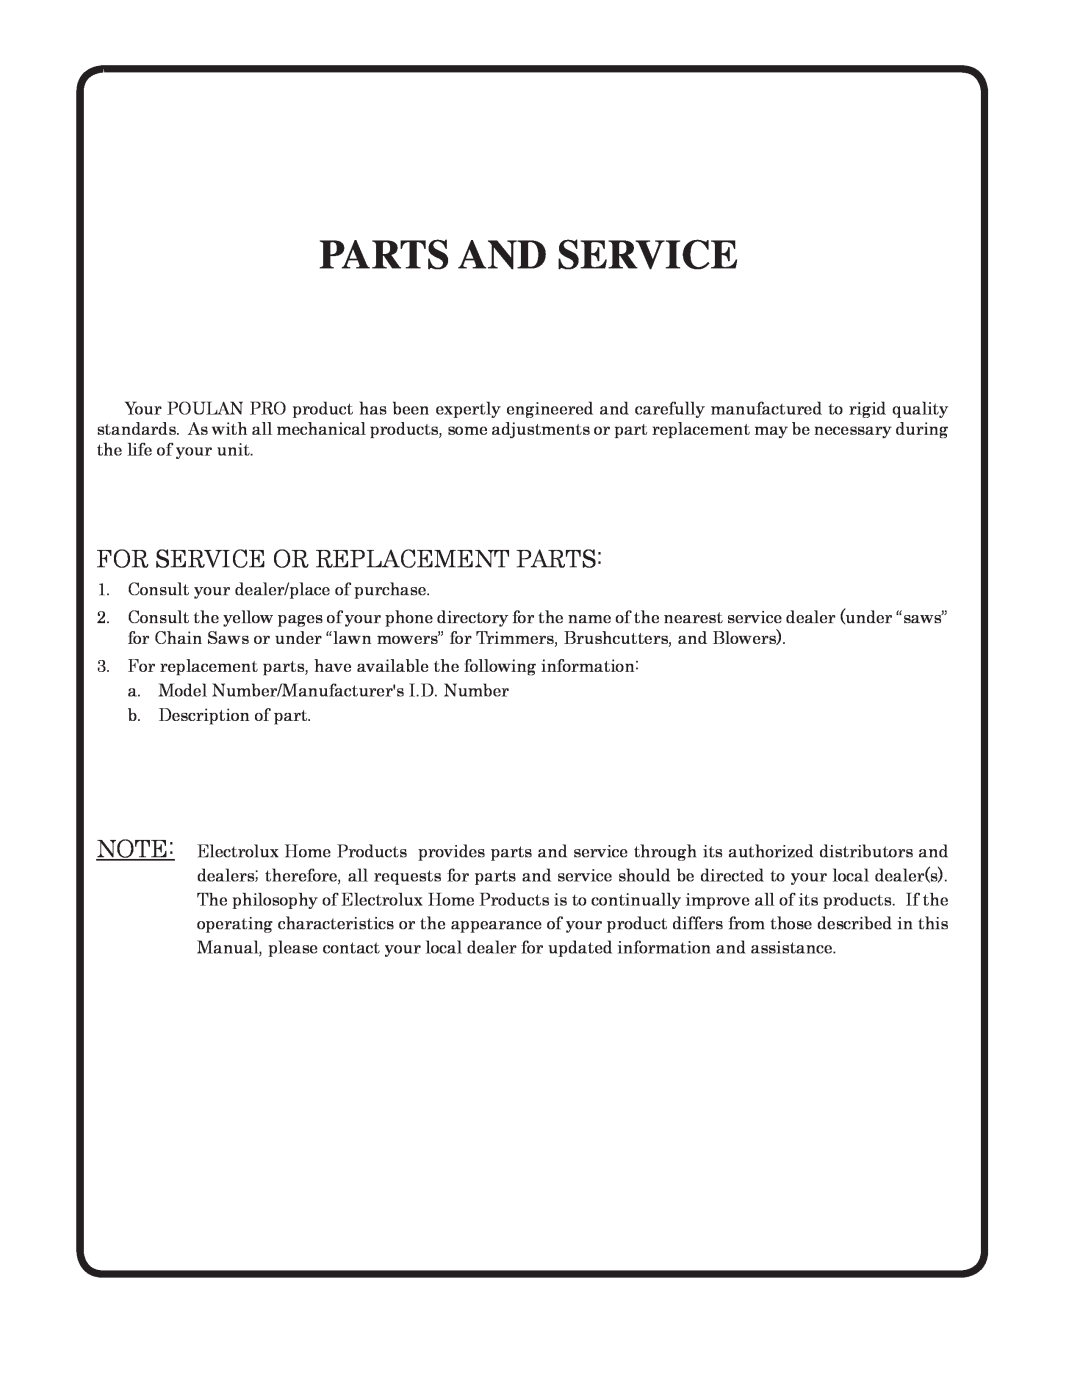 Poulan PD185H42STC owner manual Parts And Service, For Service Or Replacement Parts 